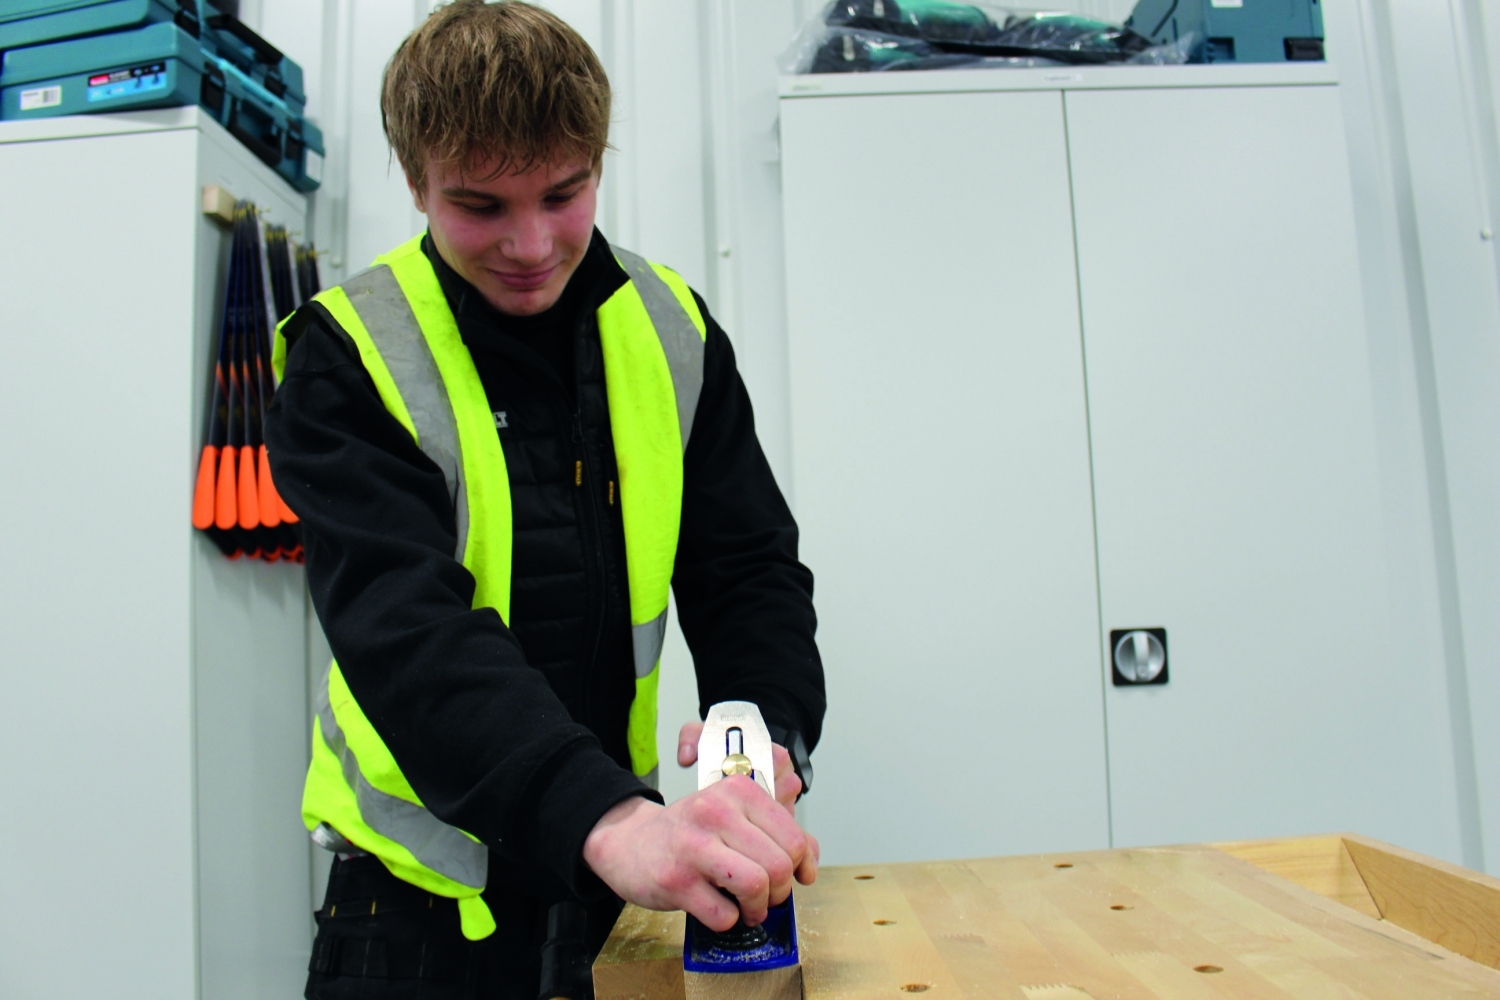 Charlie Colmer, Carpentry and Joinery Level 2